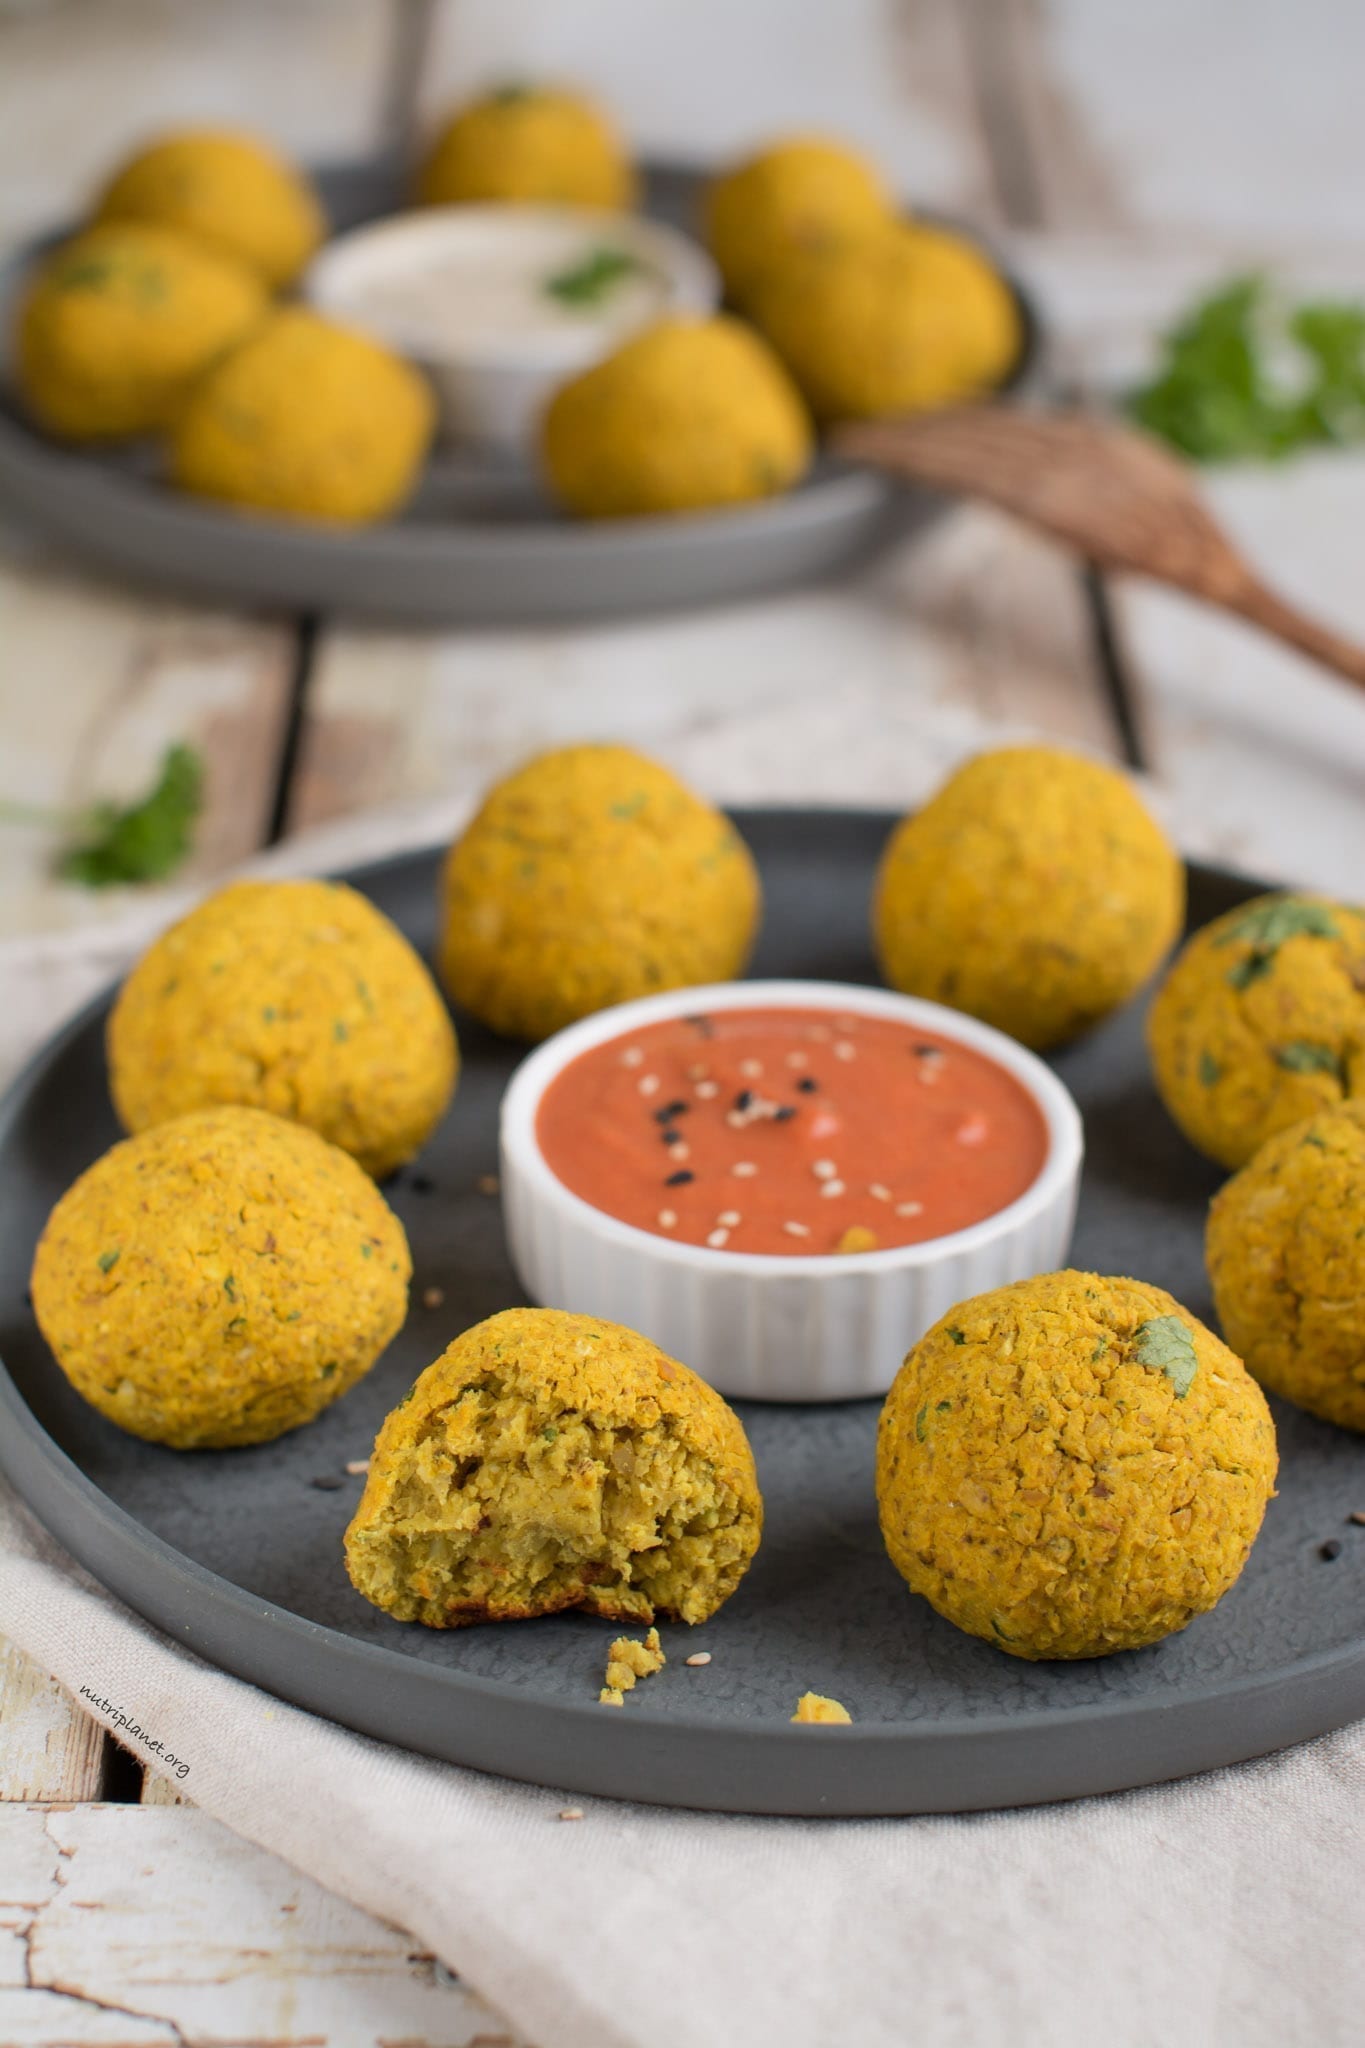 Easy Baked Vegan Falafel Recipe with Canned Chickpeas